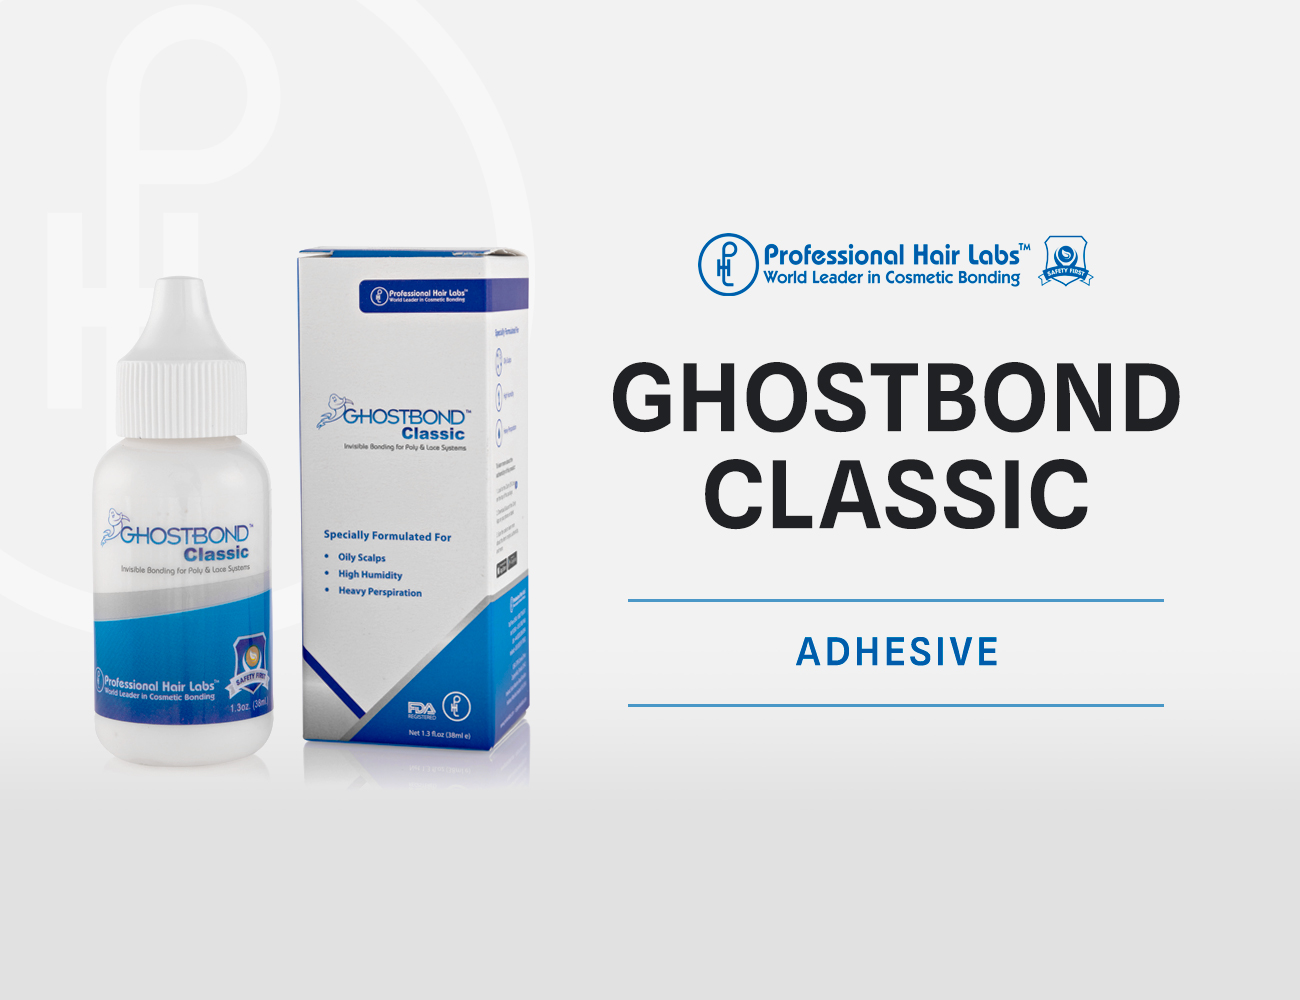 GHOSTBOND Classic